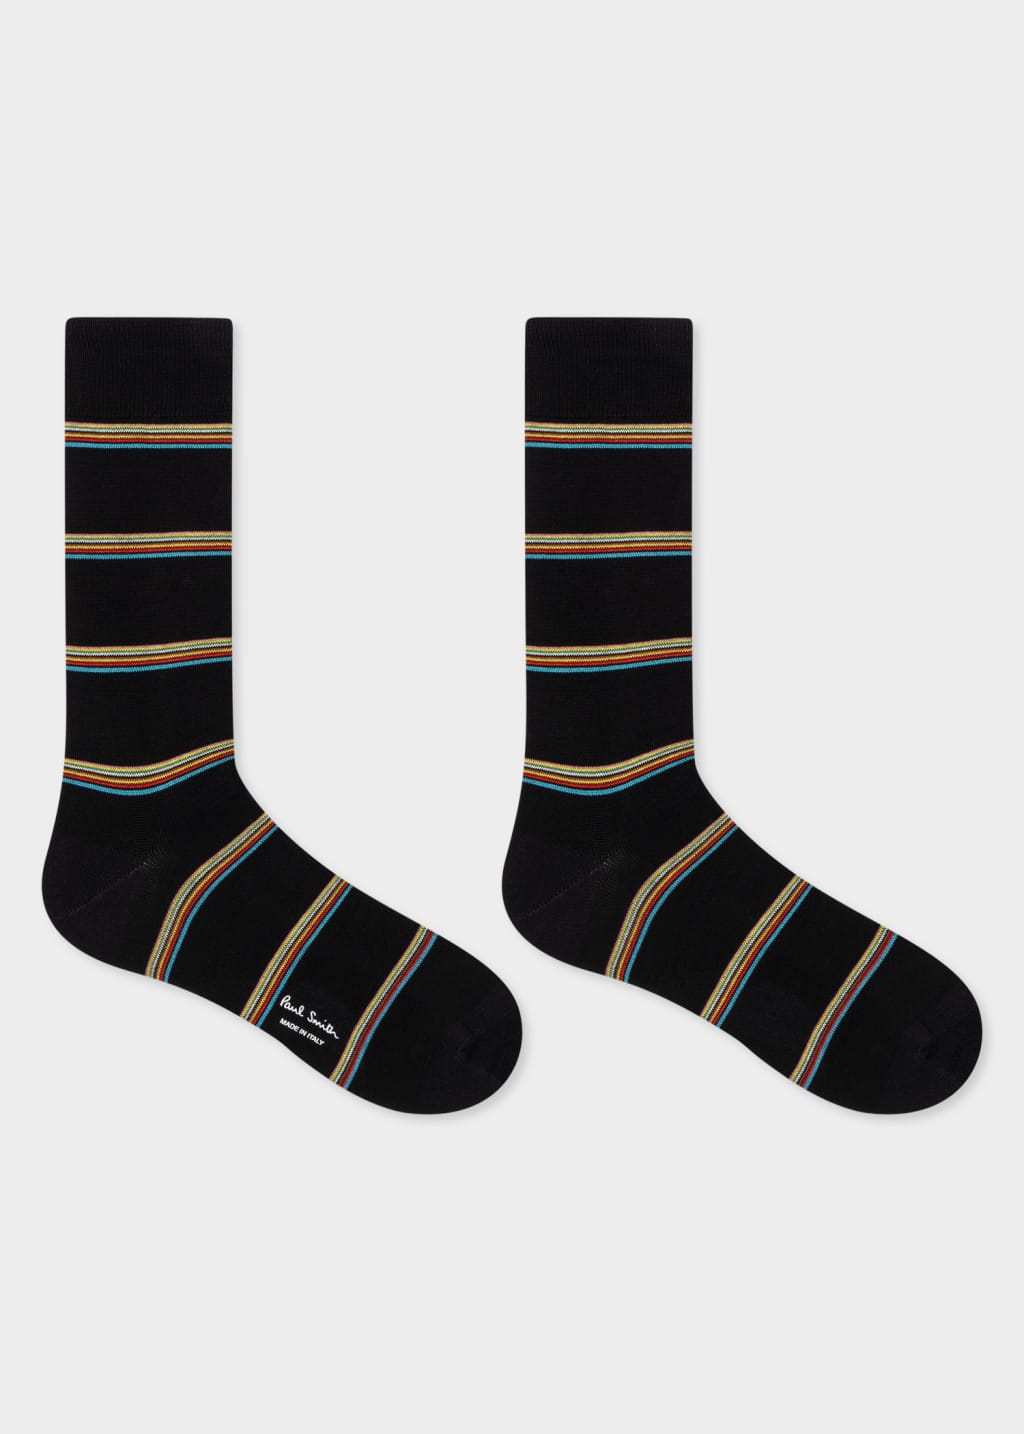 Pair View - Stripe And Spot Socks Three Pack Paul Smith